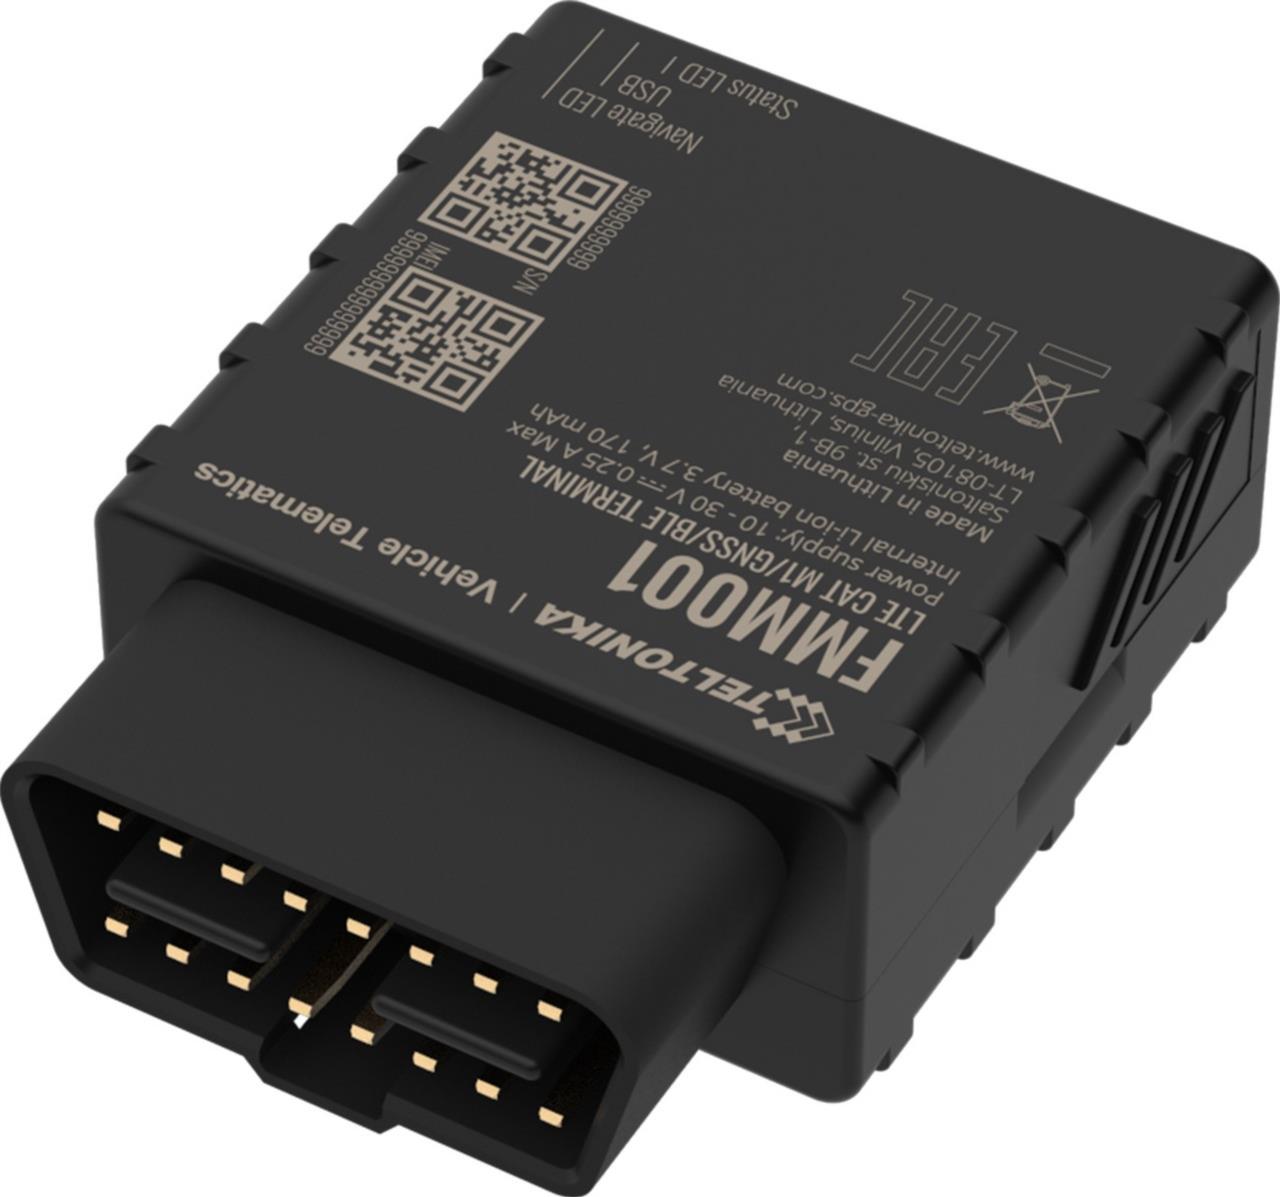 FMM001 Plug-and-Play-OBD-Tracker für LTE CAT M1 / GNSS / BLE